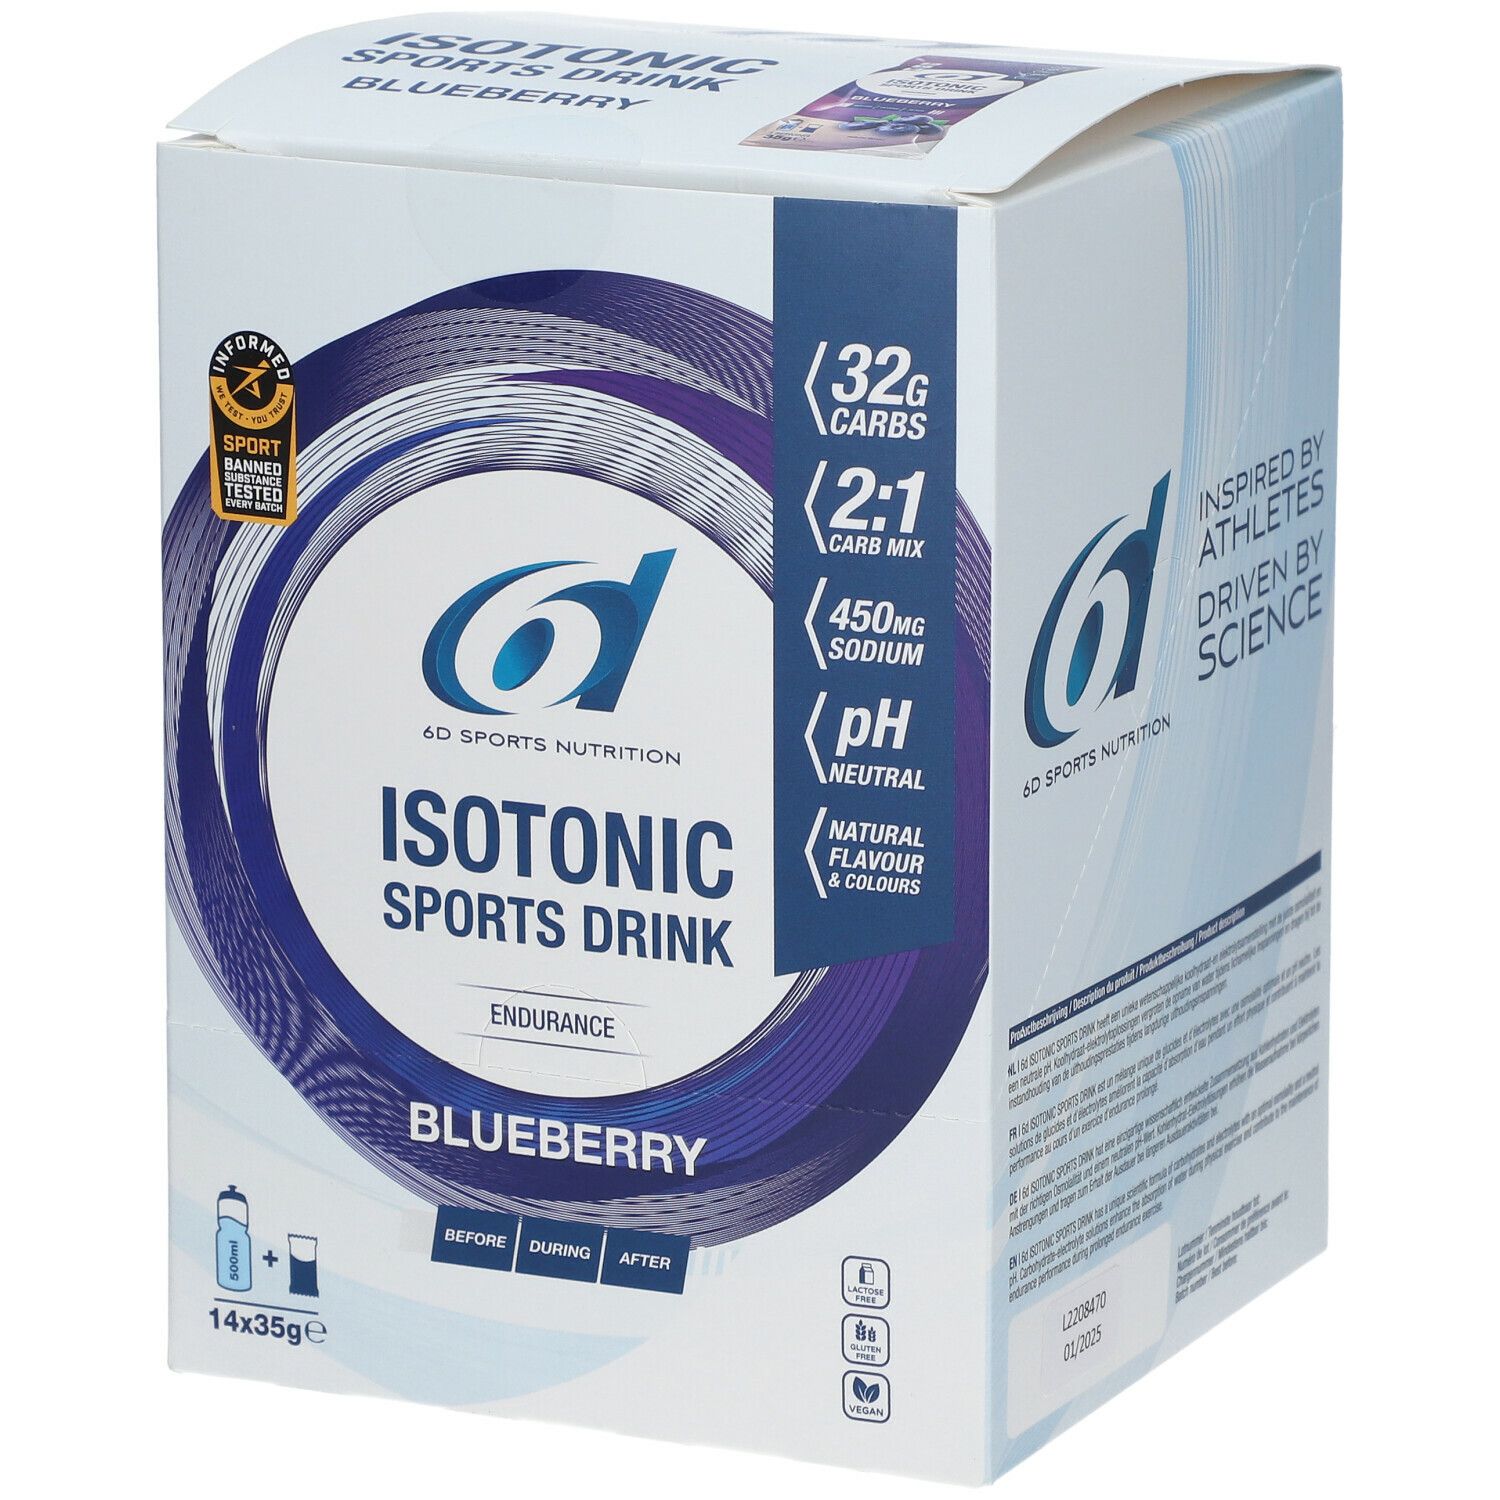 6D Sports Nutrition Isotonic Sports Drink Endurance Blueberry